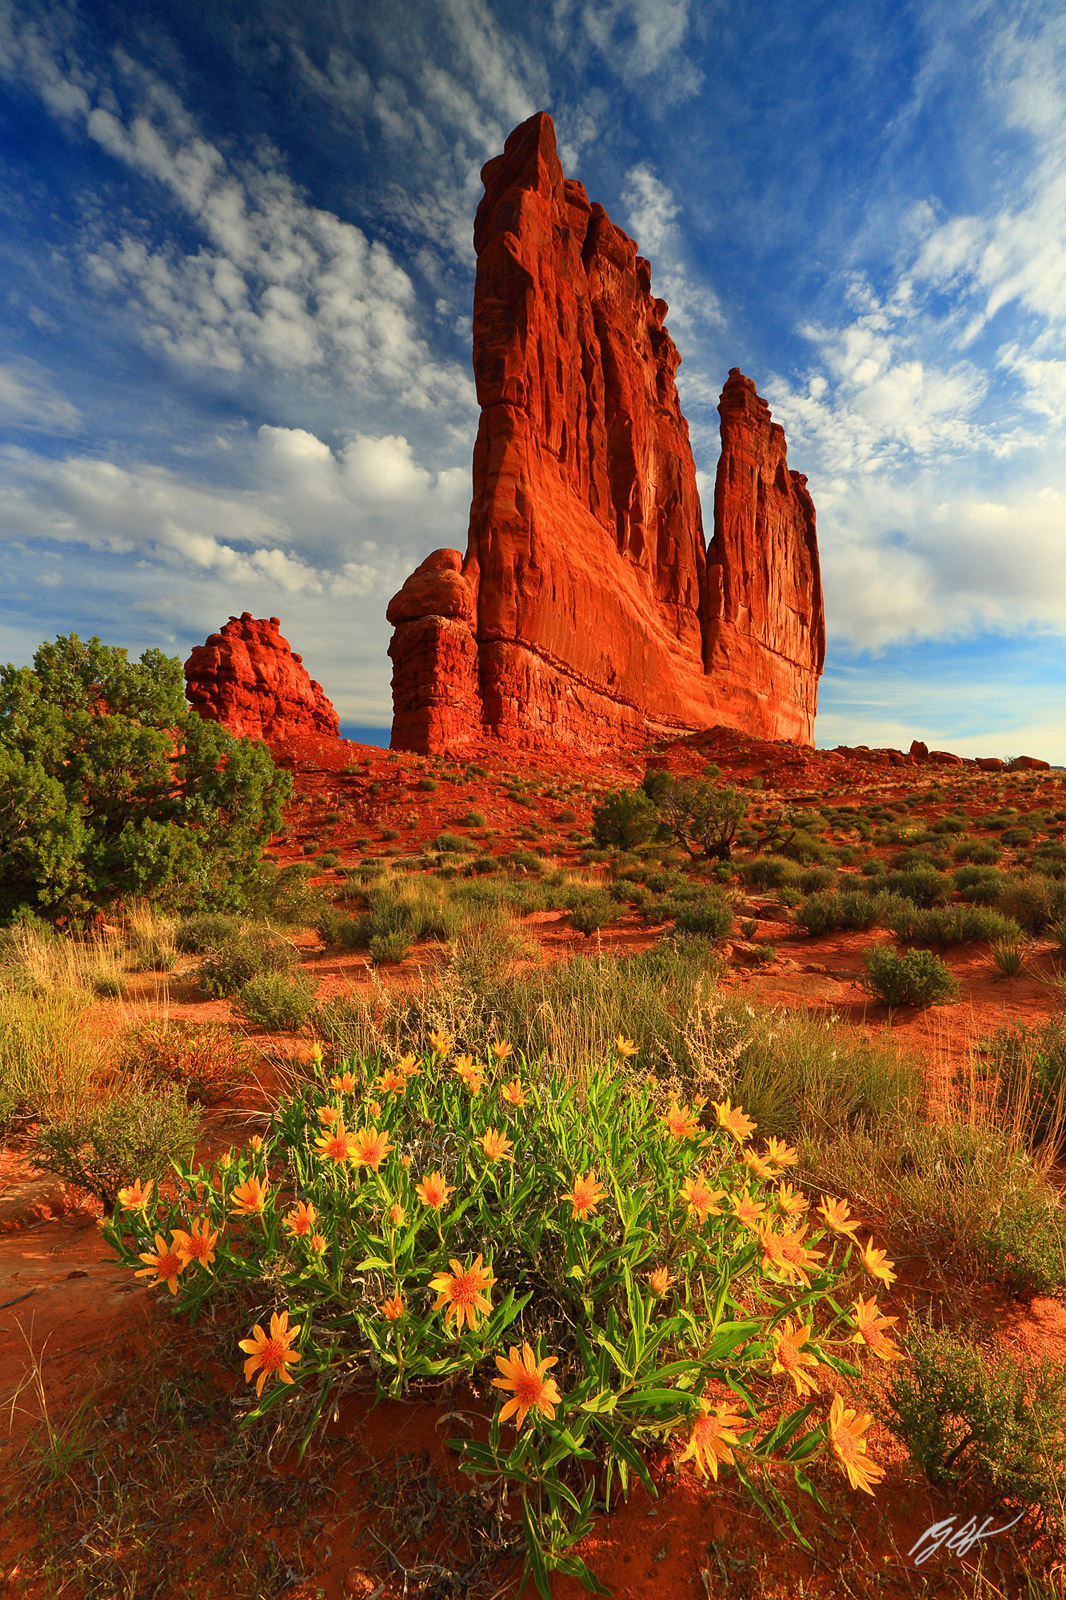 Wild Balsamroot and the Courthouse Towers in Arches National Park in Utah